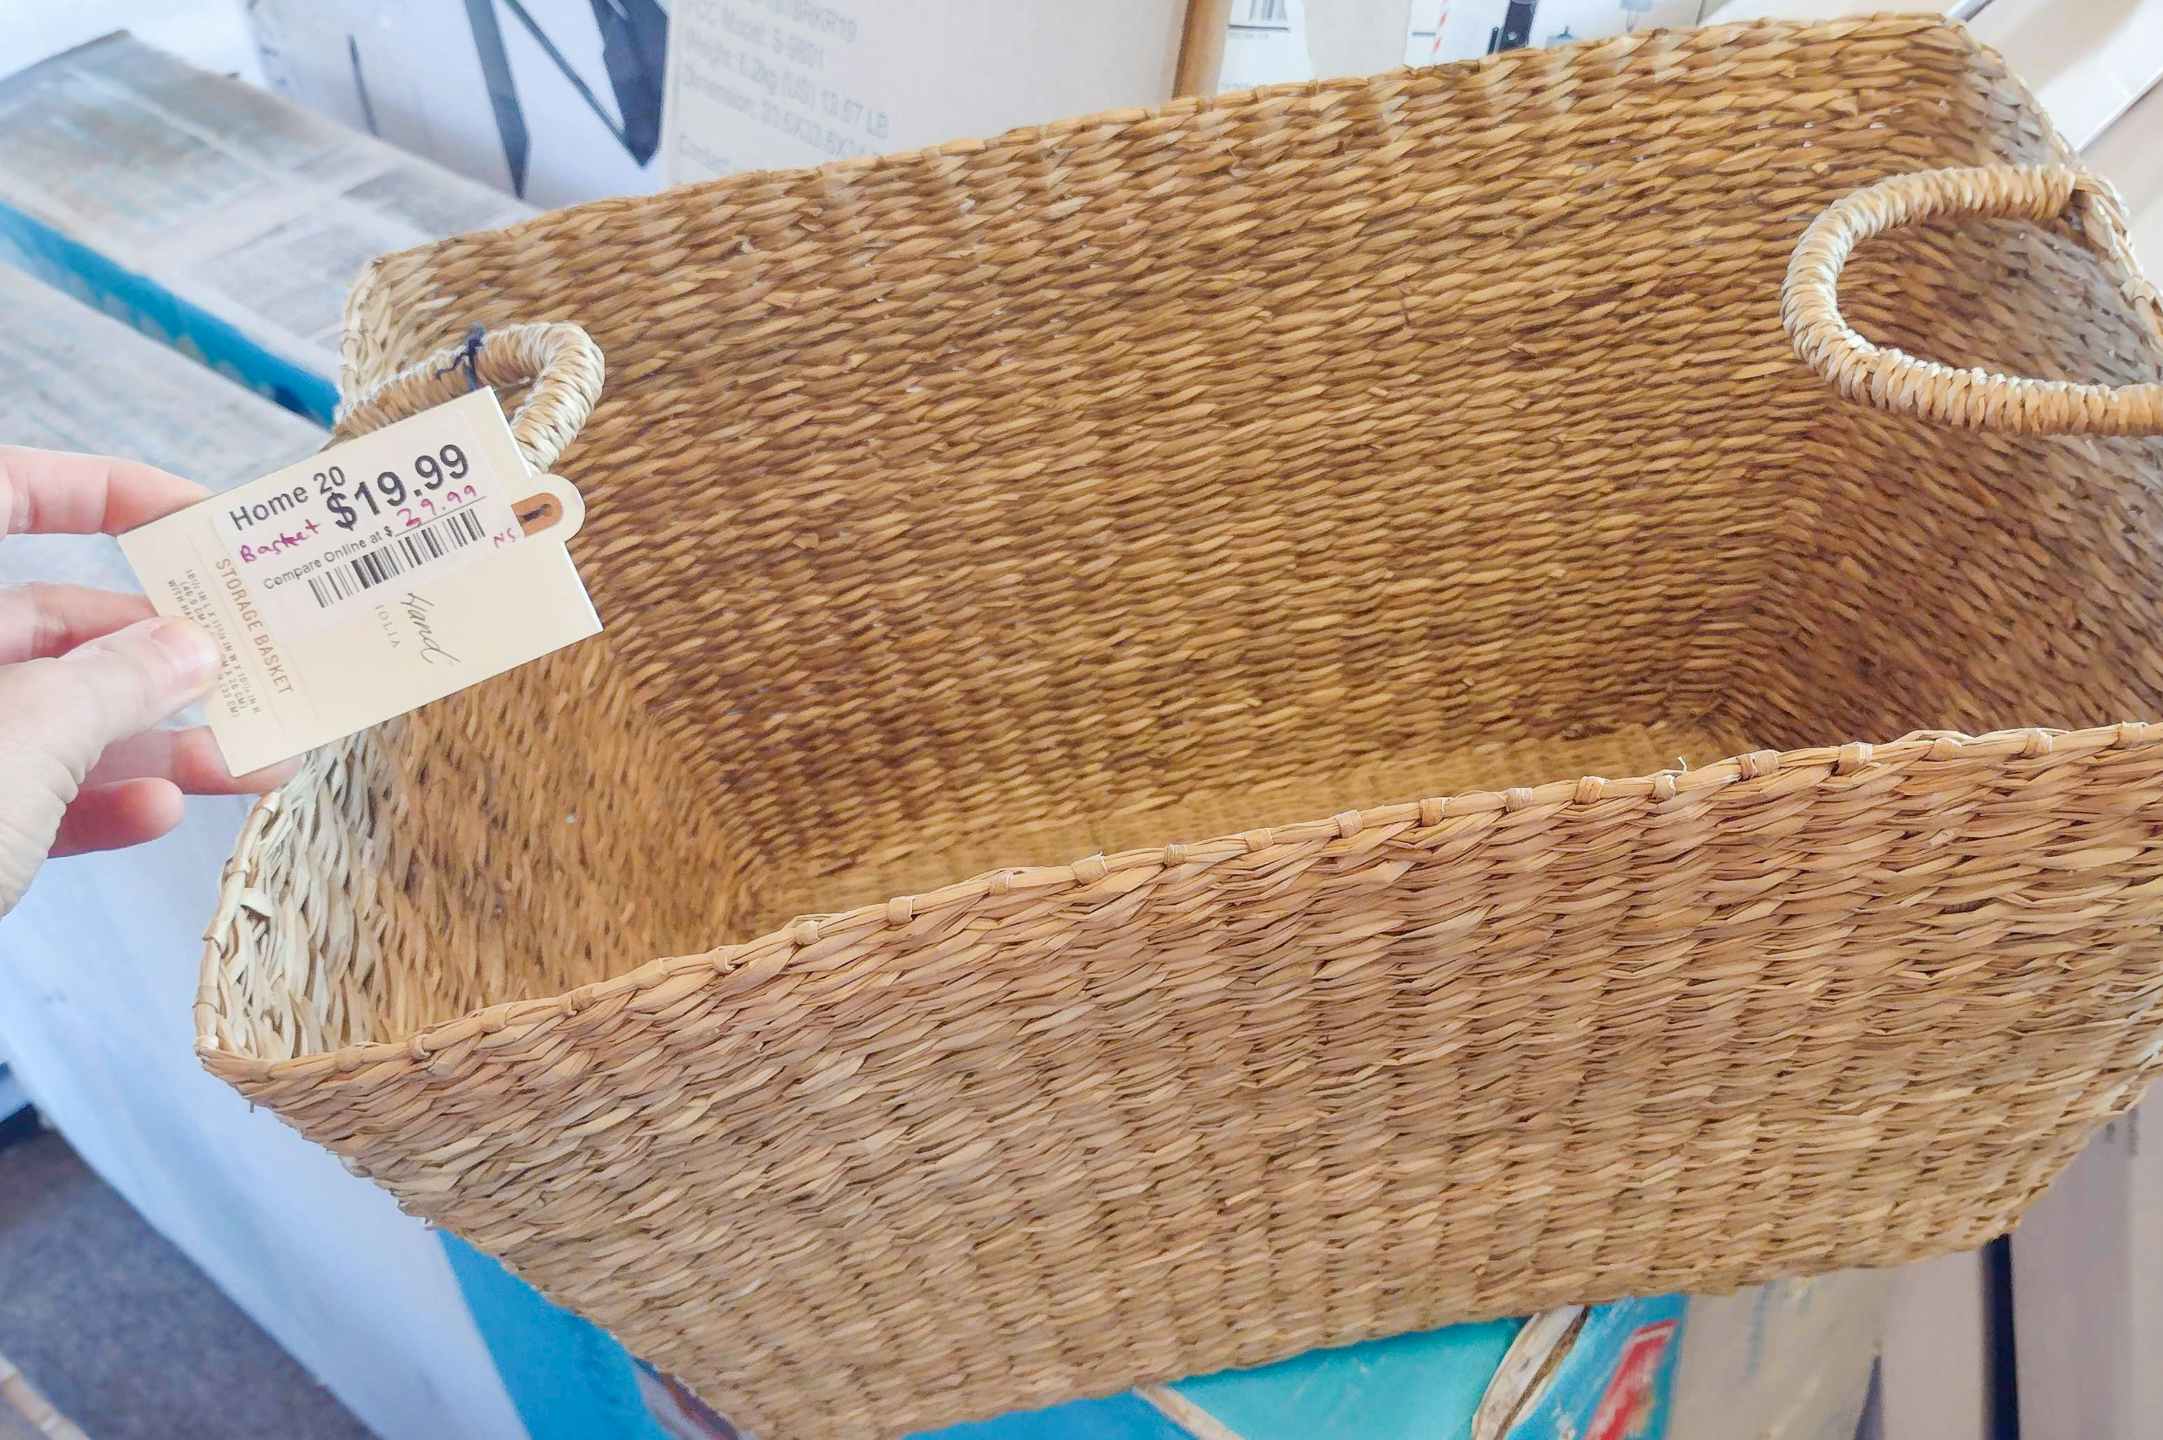 A person's hand holding a tag up for a Hearth and Hand basket sitting on a box.